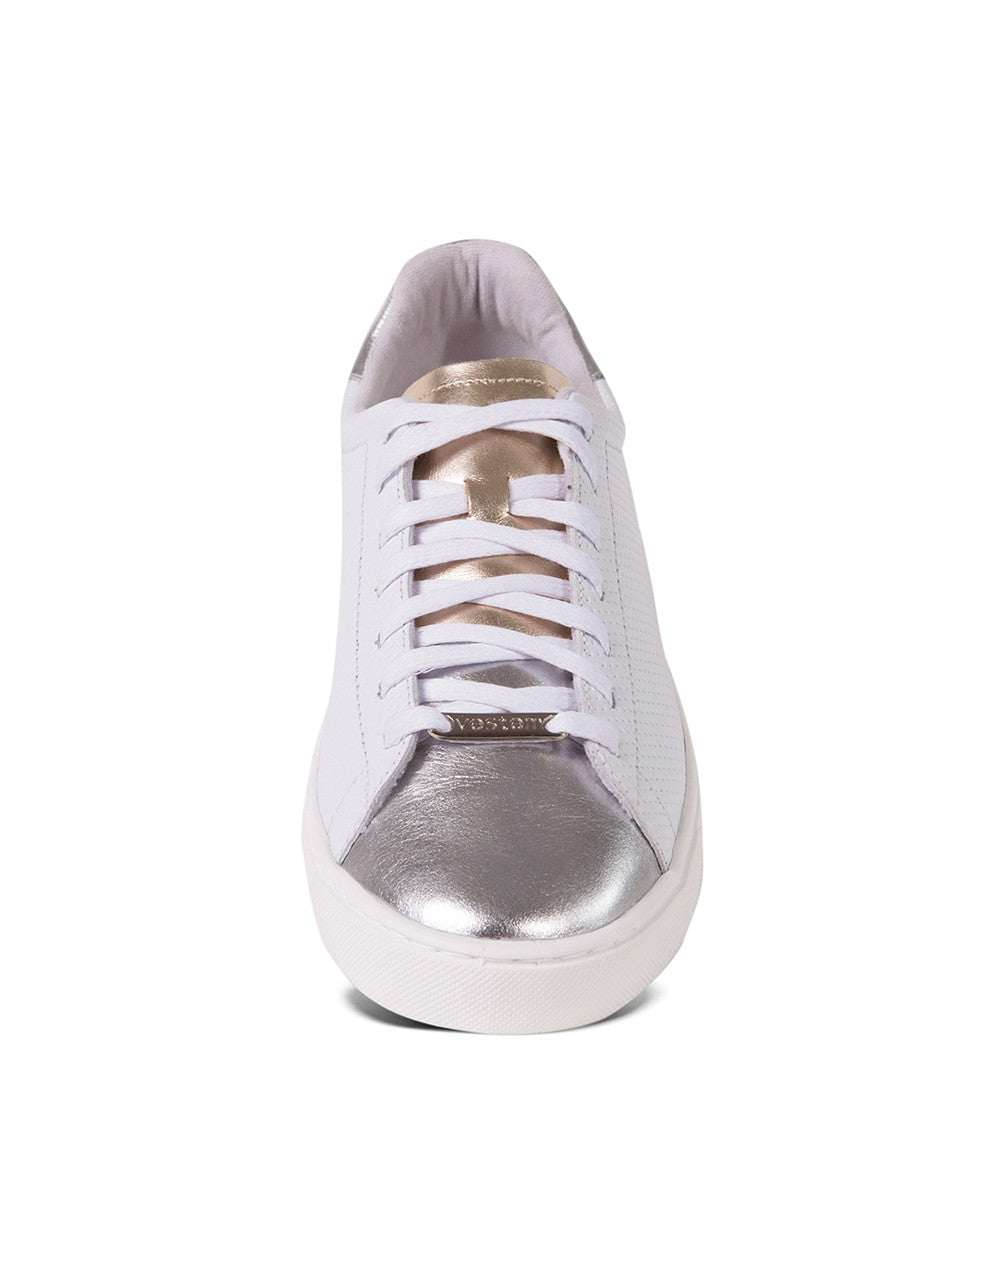 gold and silver sneakers